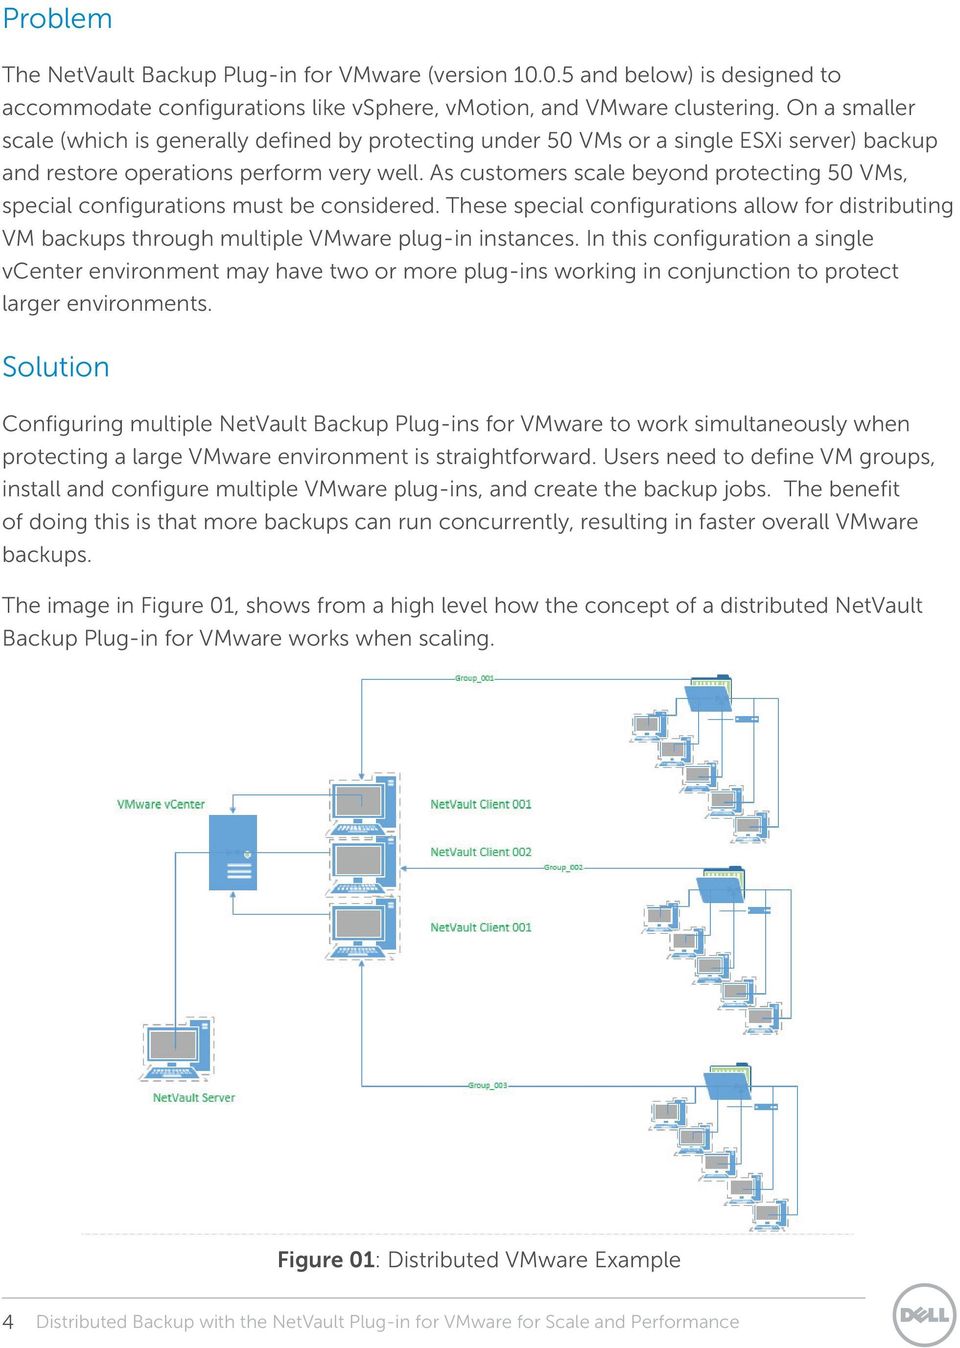 As customers scale beyond protecting 50 VMs, special configurations must be considered. These special configurations allow for distributing VM backups through multiple VMware plug-in instances.